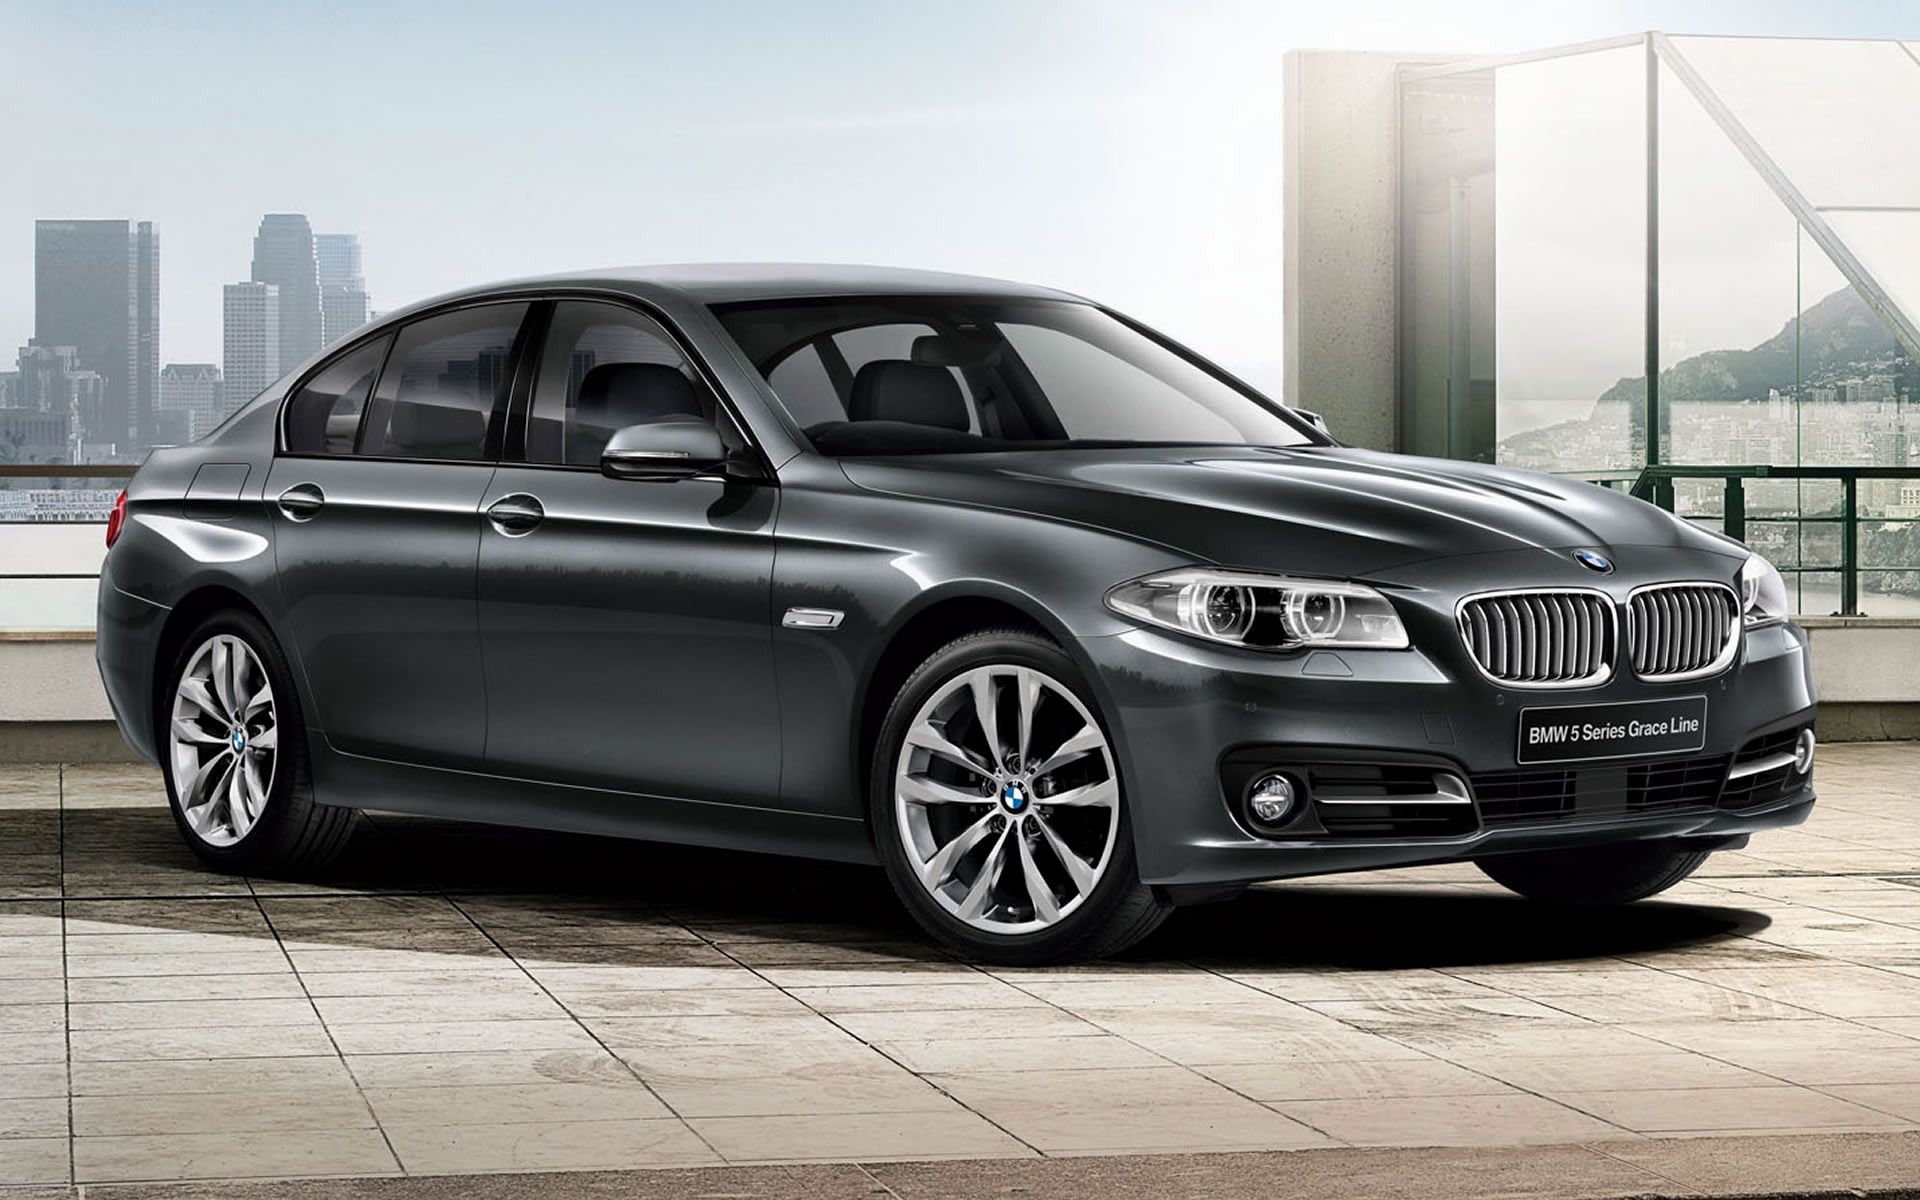 BMW 5 Series Grace Line (JP) and HD Image